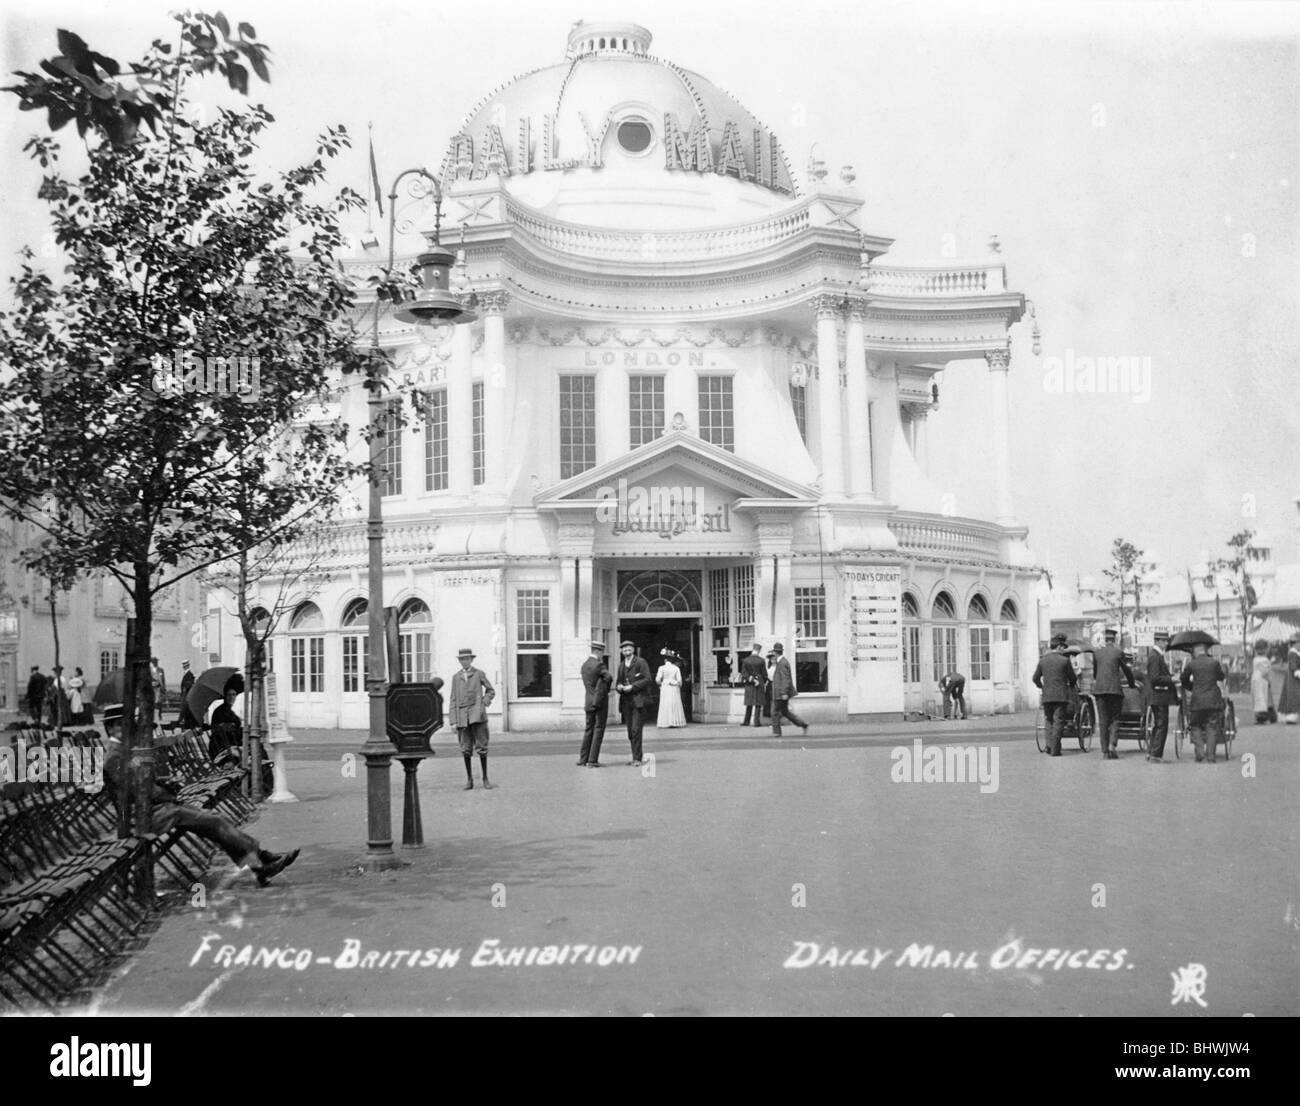 The Daily Mail offices at the Franco-British Exhibition, White City, London, 1908. Artist: Unknown Stock Photo